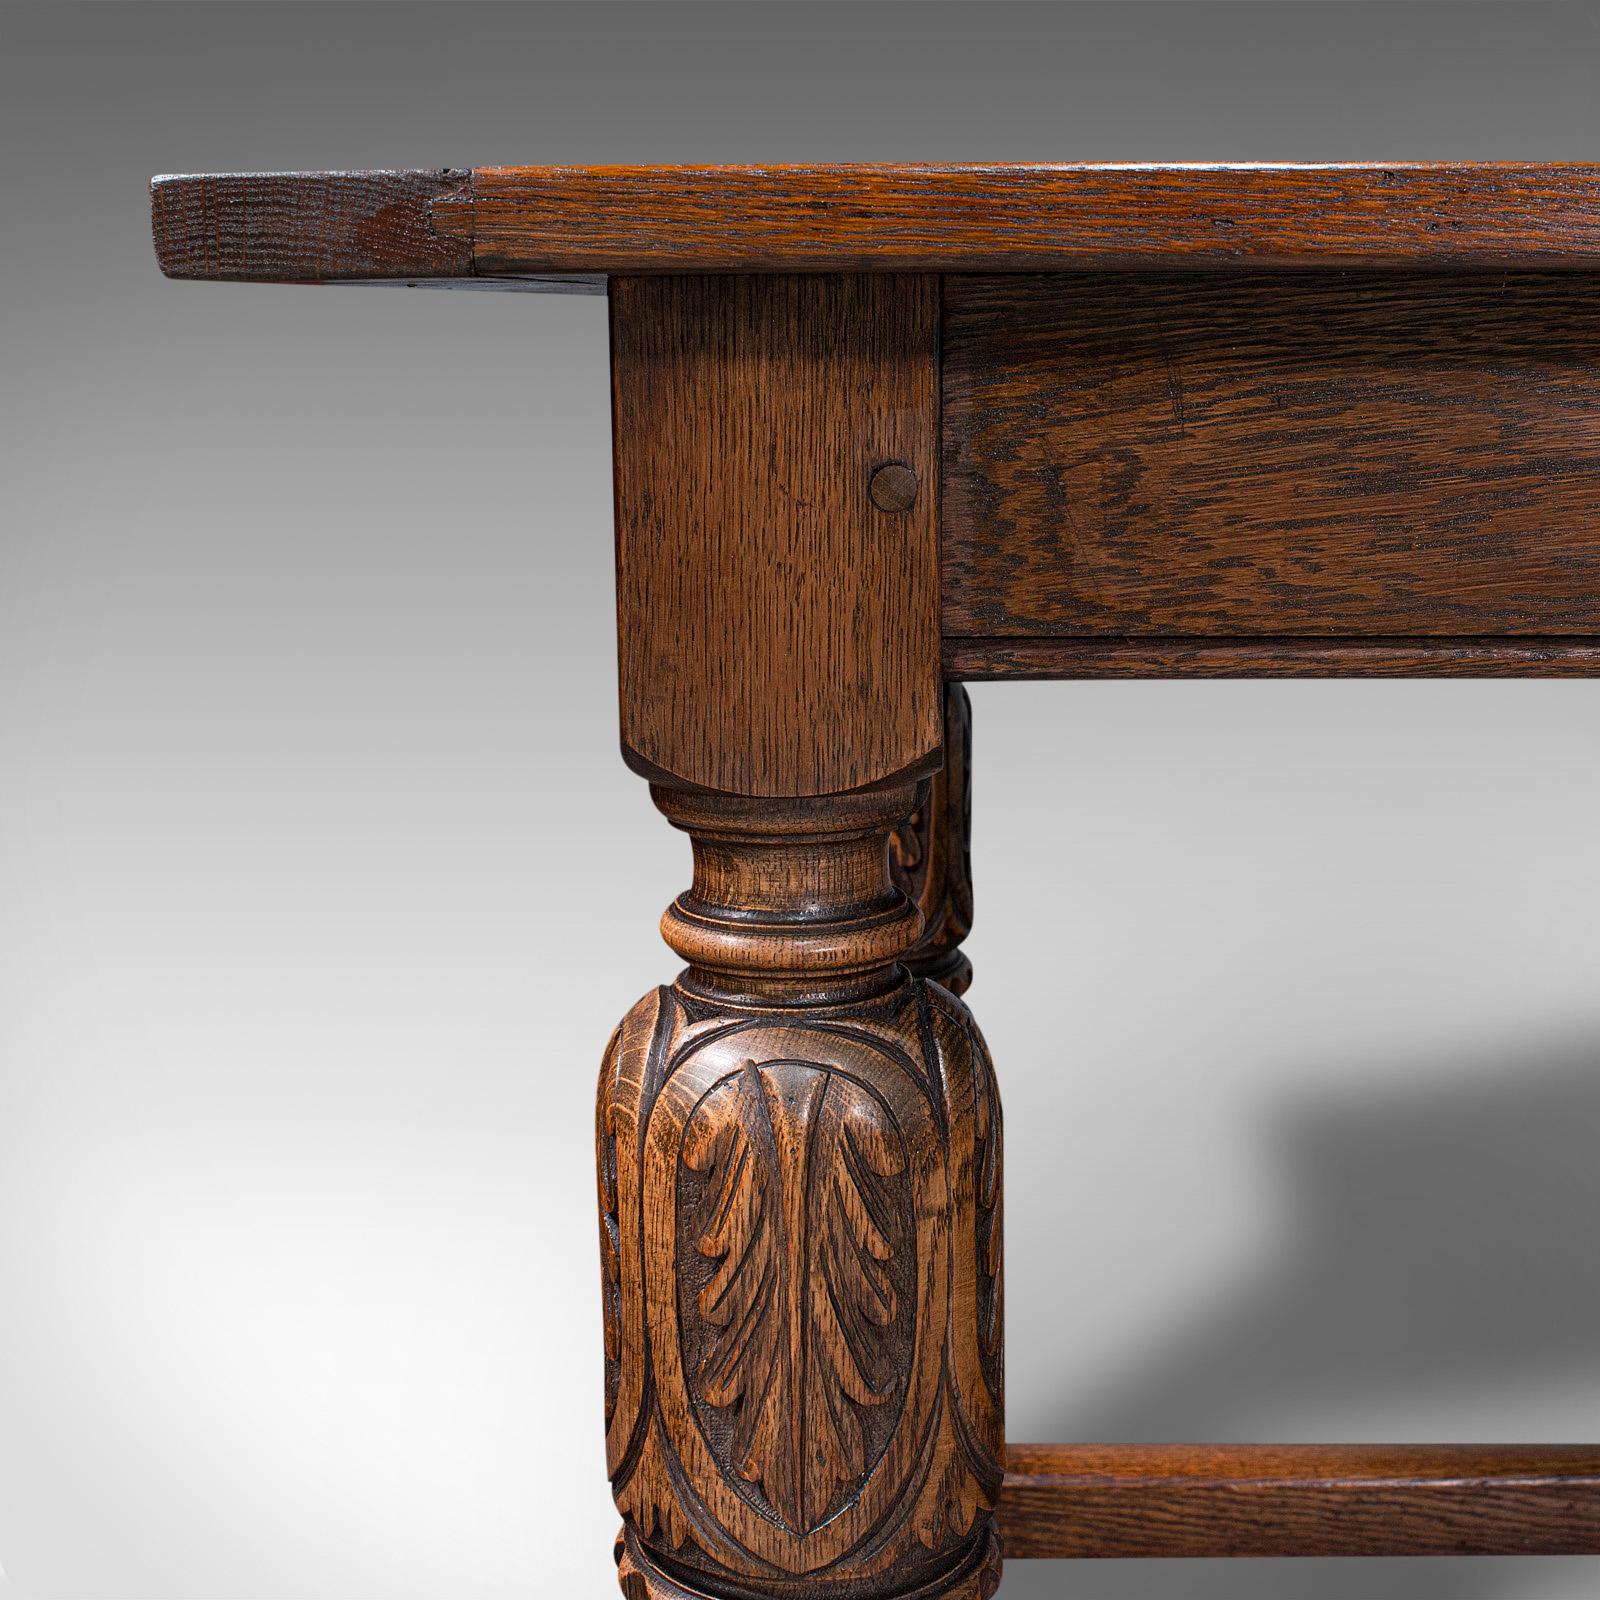 Antique Refectory Table, English, Oak, Dining, Jacobean Revival, Edwardian, 1910 For Sale 3